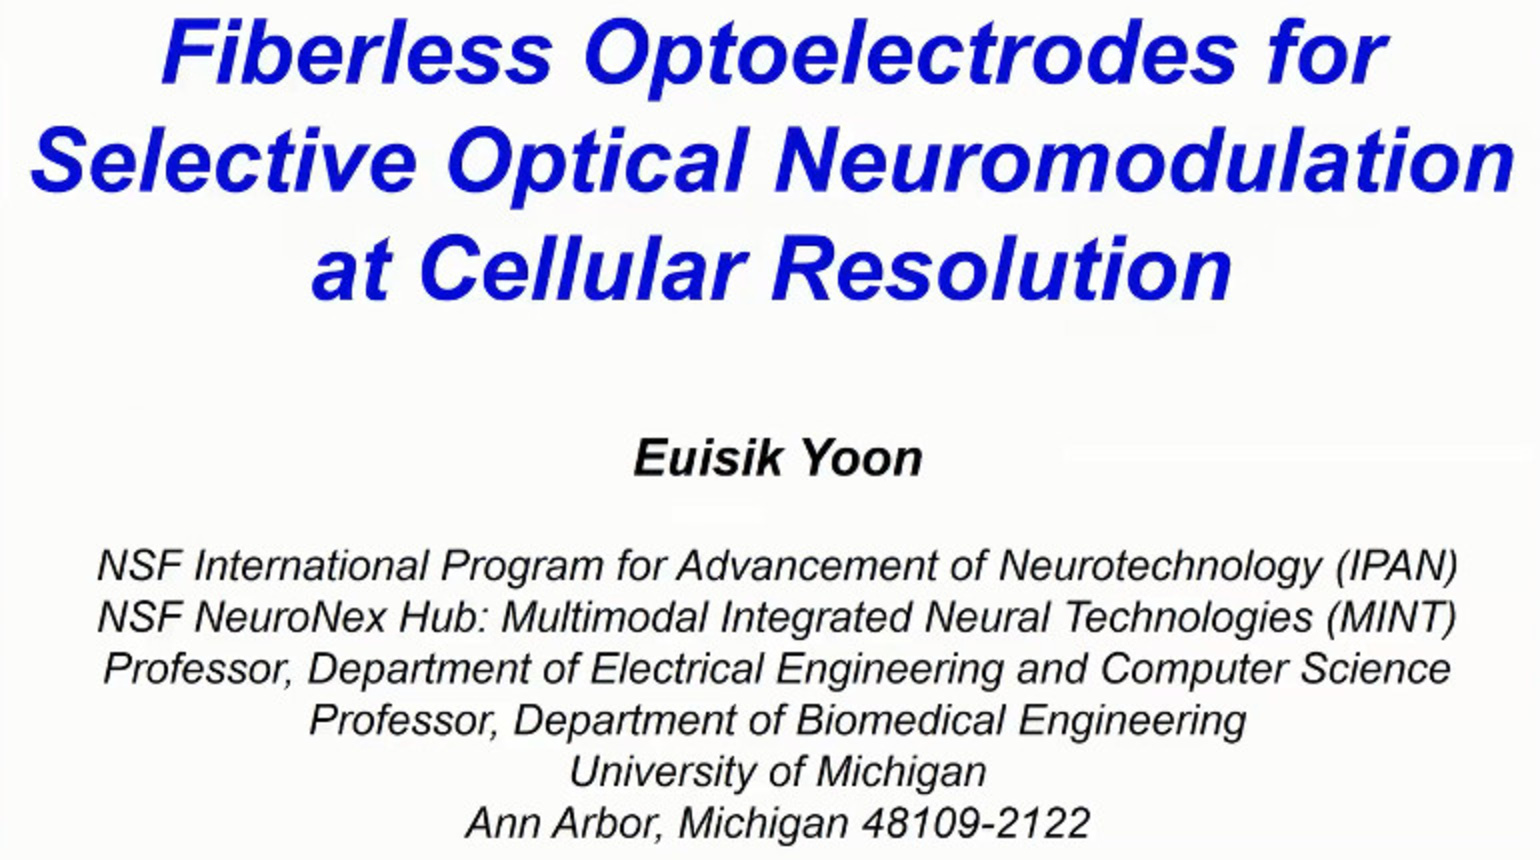 IEEE Brain: Fiberless Optoelectrodes for Selective Optical Neuromodulation at Cellular Resolution